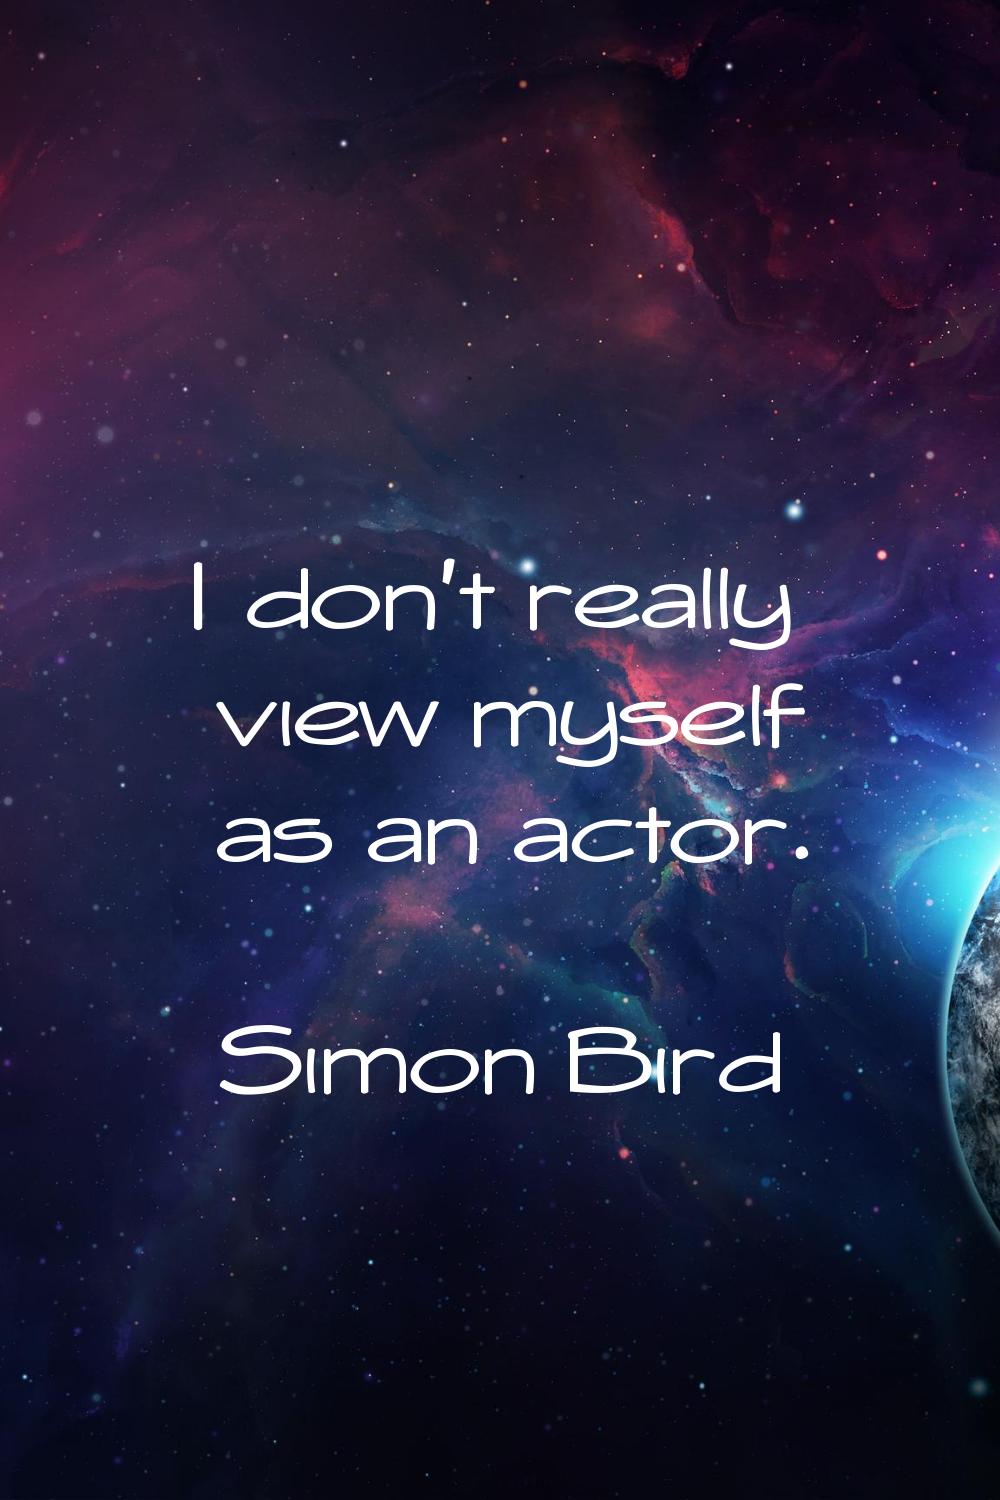 I don't really view myself as an actor.